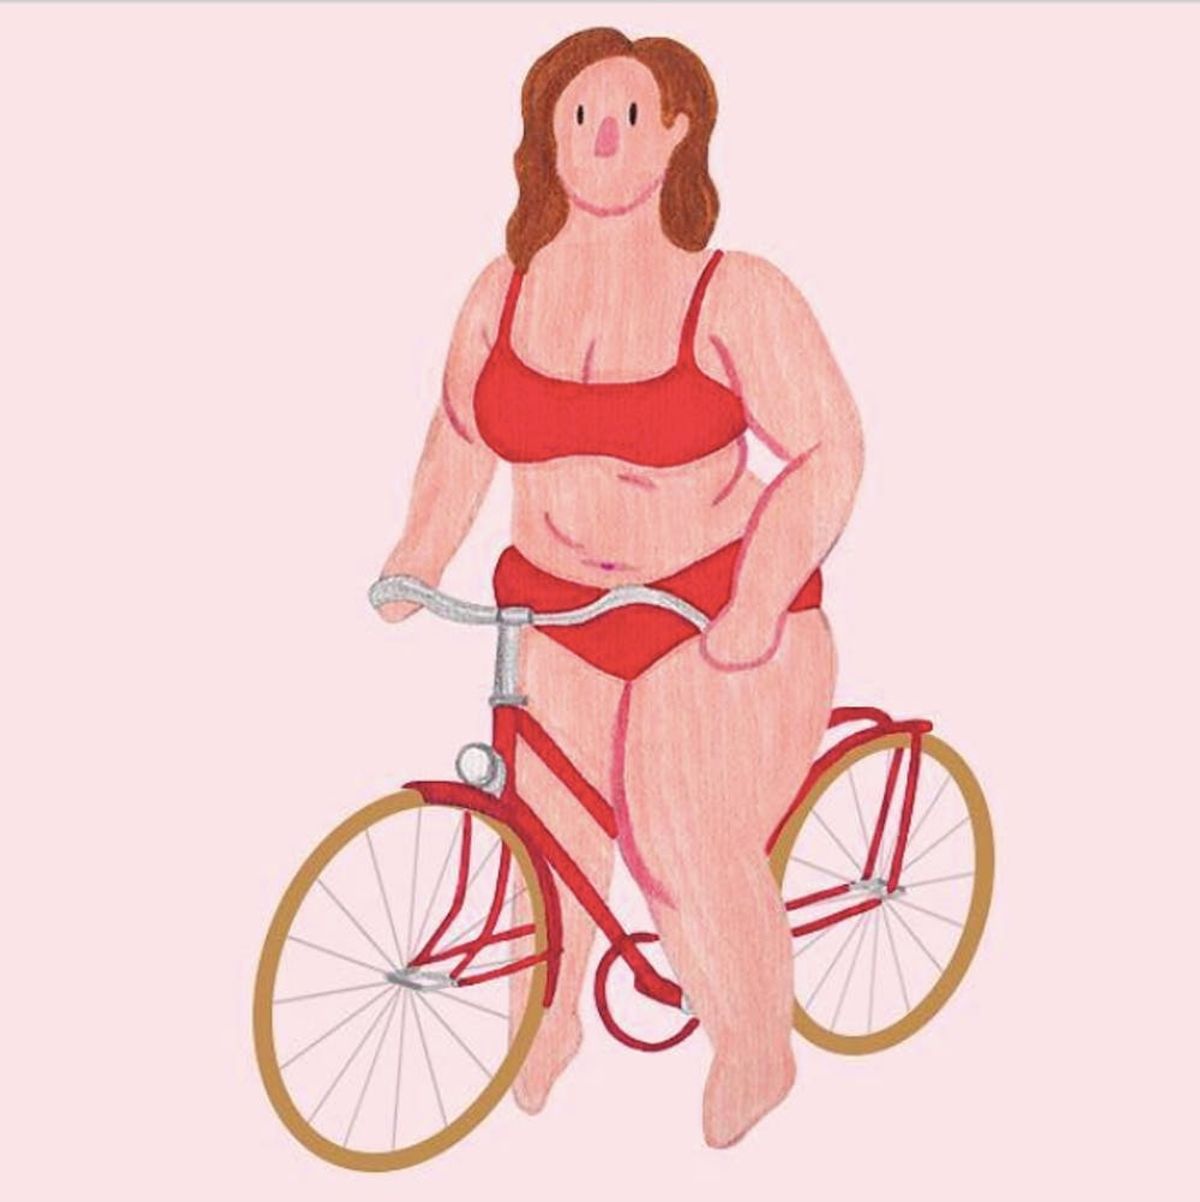 These Illustrations Transform the “Forbidden” Aspects of Women’s Bodies into an Empowering, Insta-Friendly Sensation